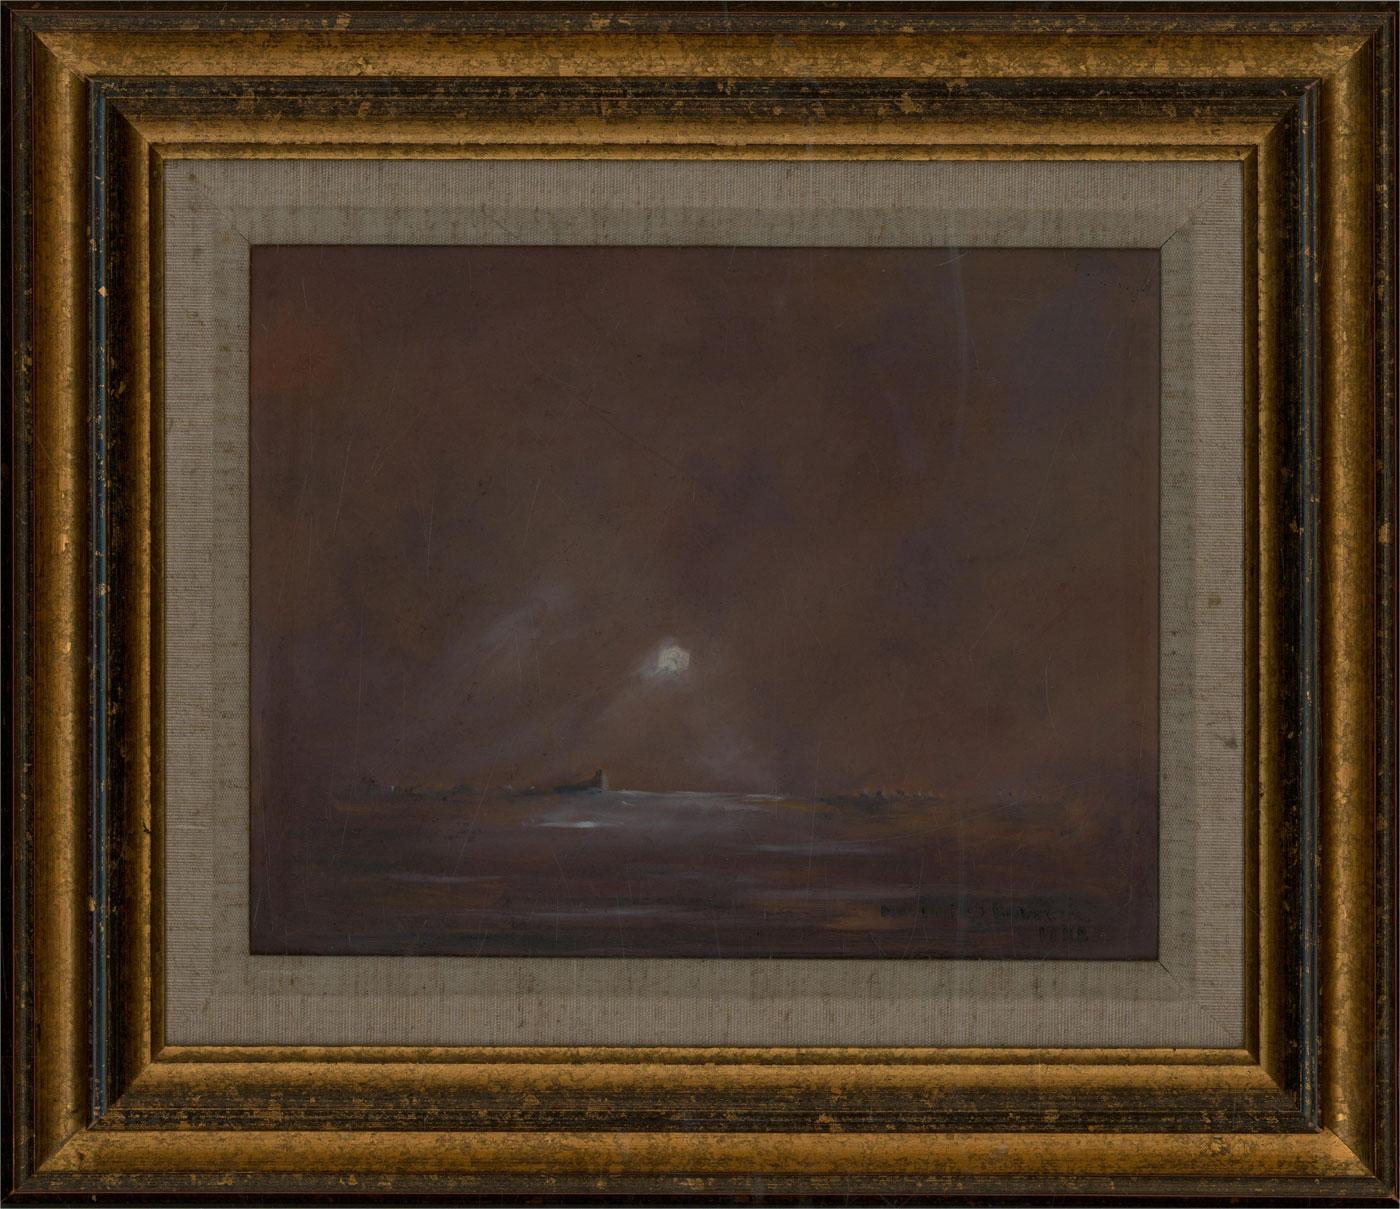 A brooding red sky stretches out over distant lights in this atmospheric seascape. The artwork is signed and dated in the bottom right-hand corner, and well presented in a gilded wood frame with a linen slip. On Board.